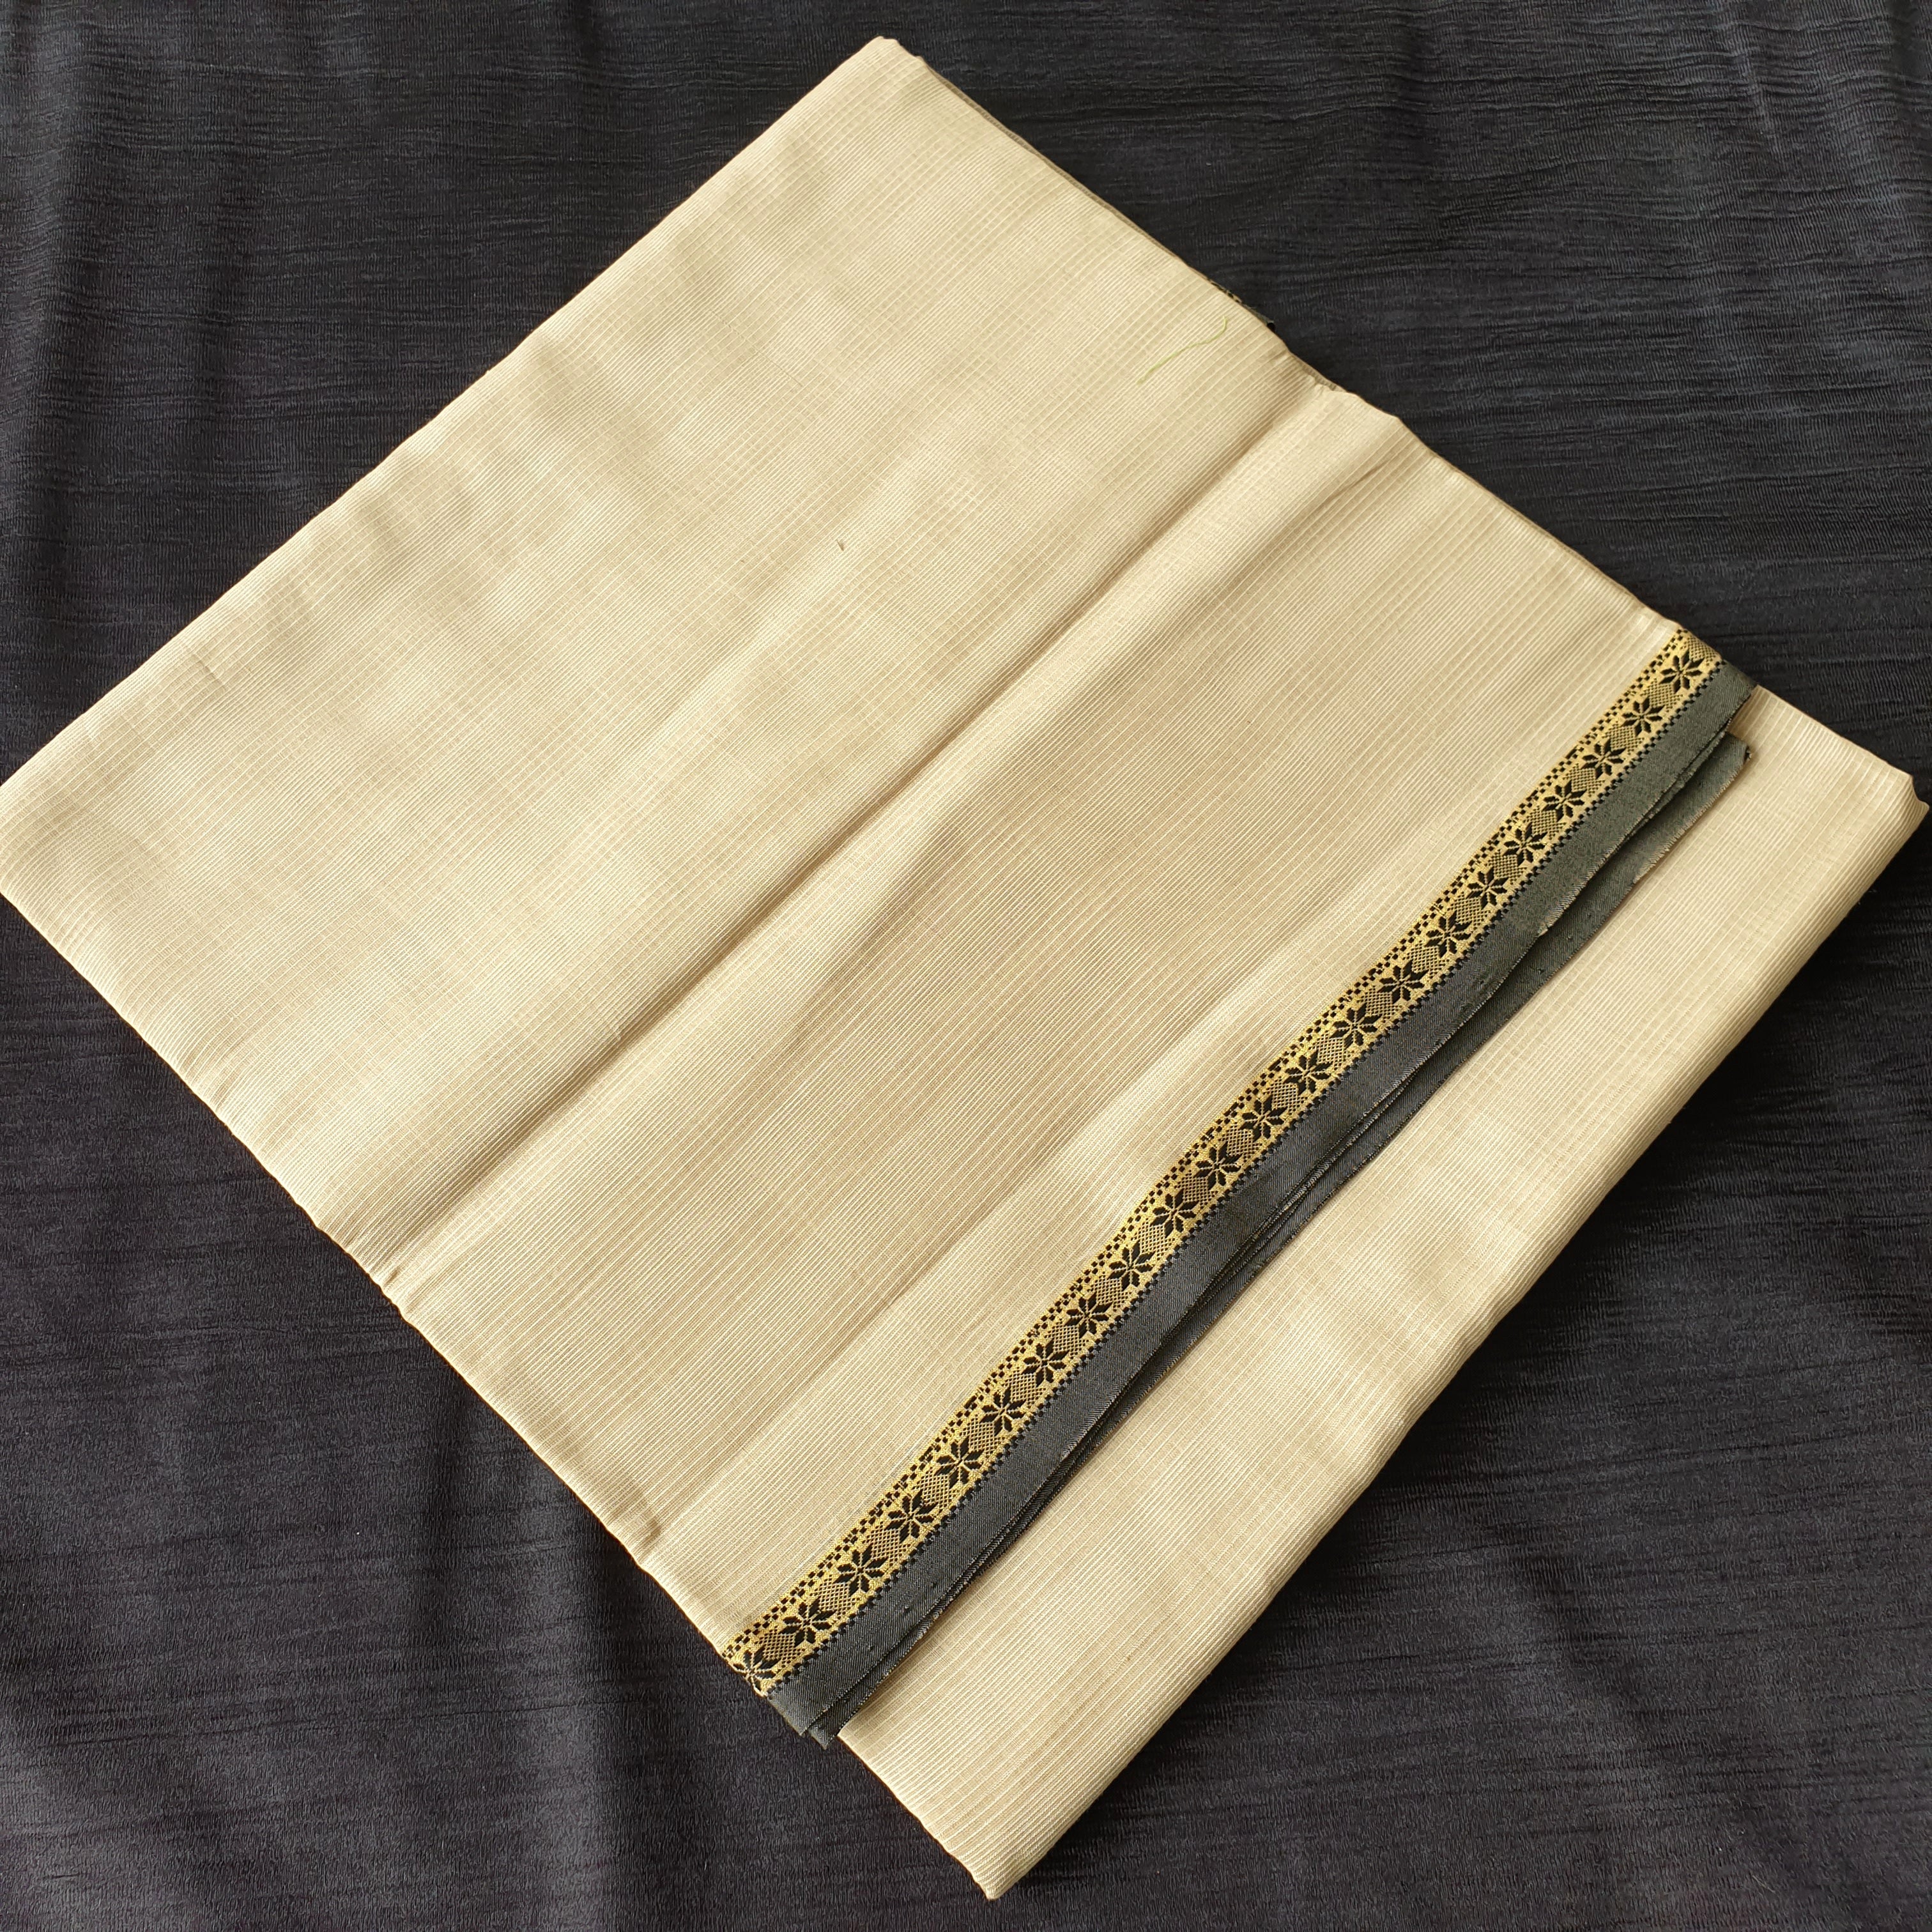 Kurta Piece with self Stripes and Gold/Black Borders.